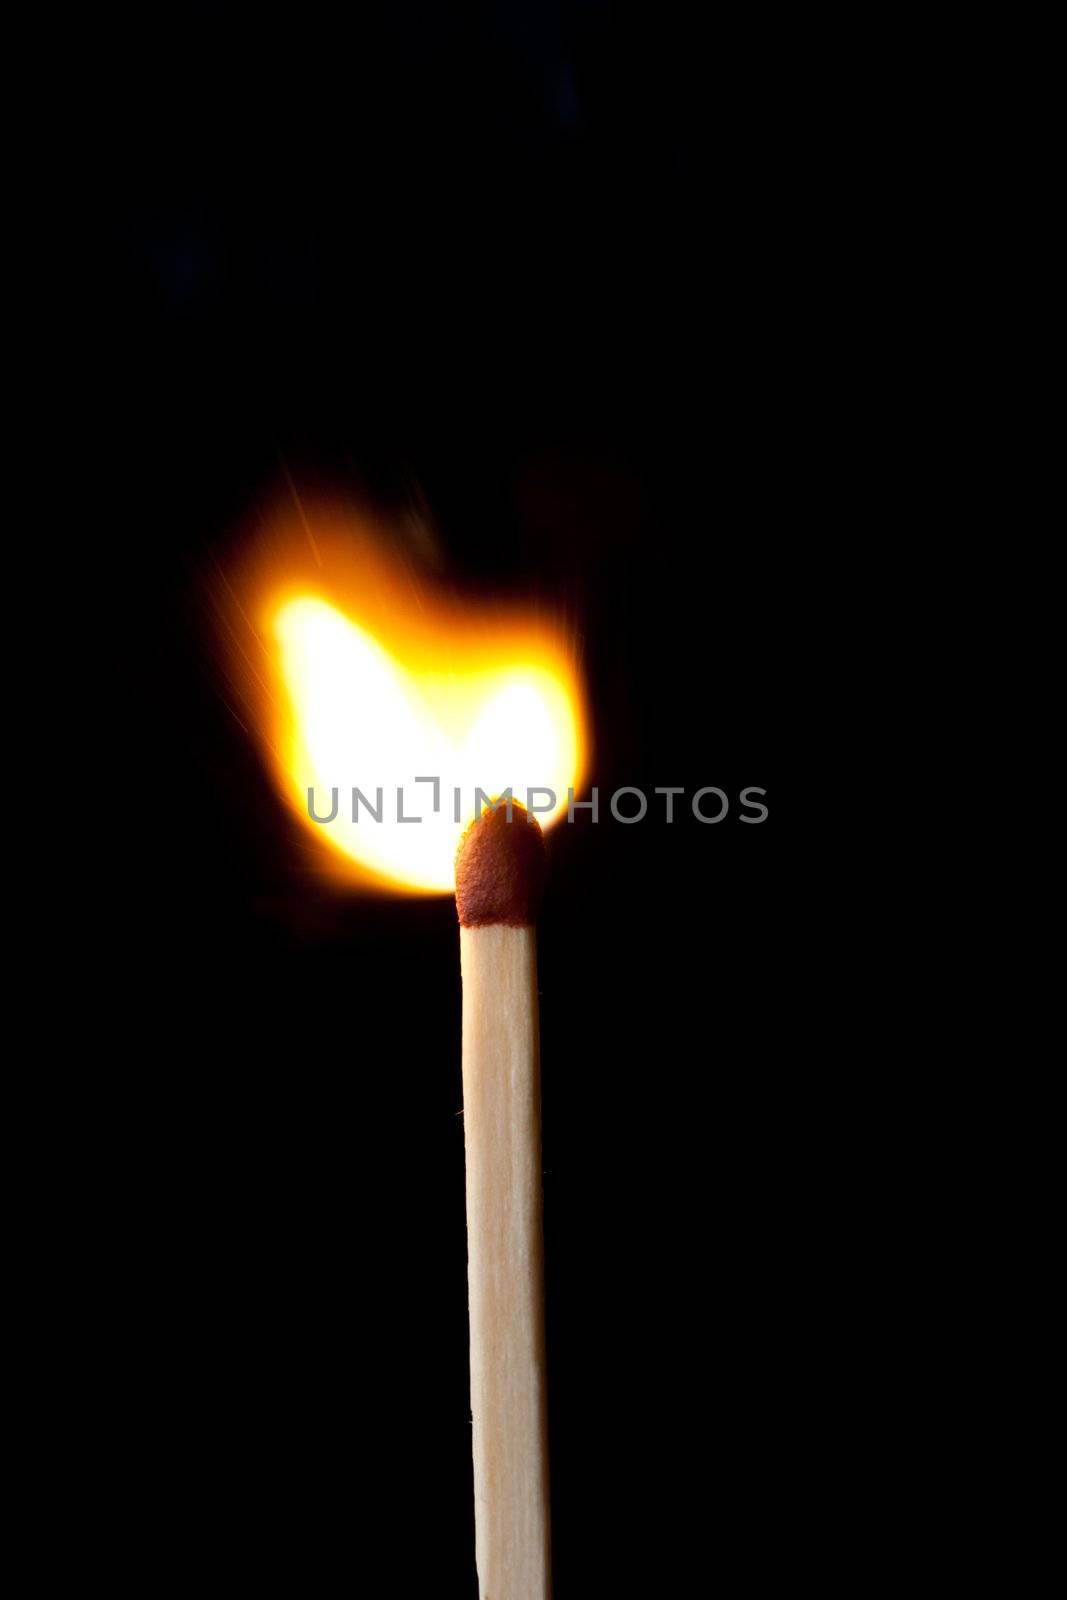 Close up of a match on fire against a black background